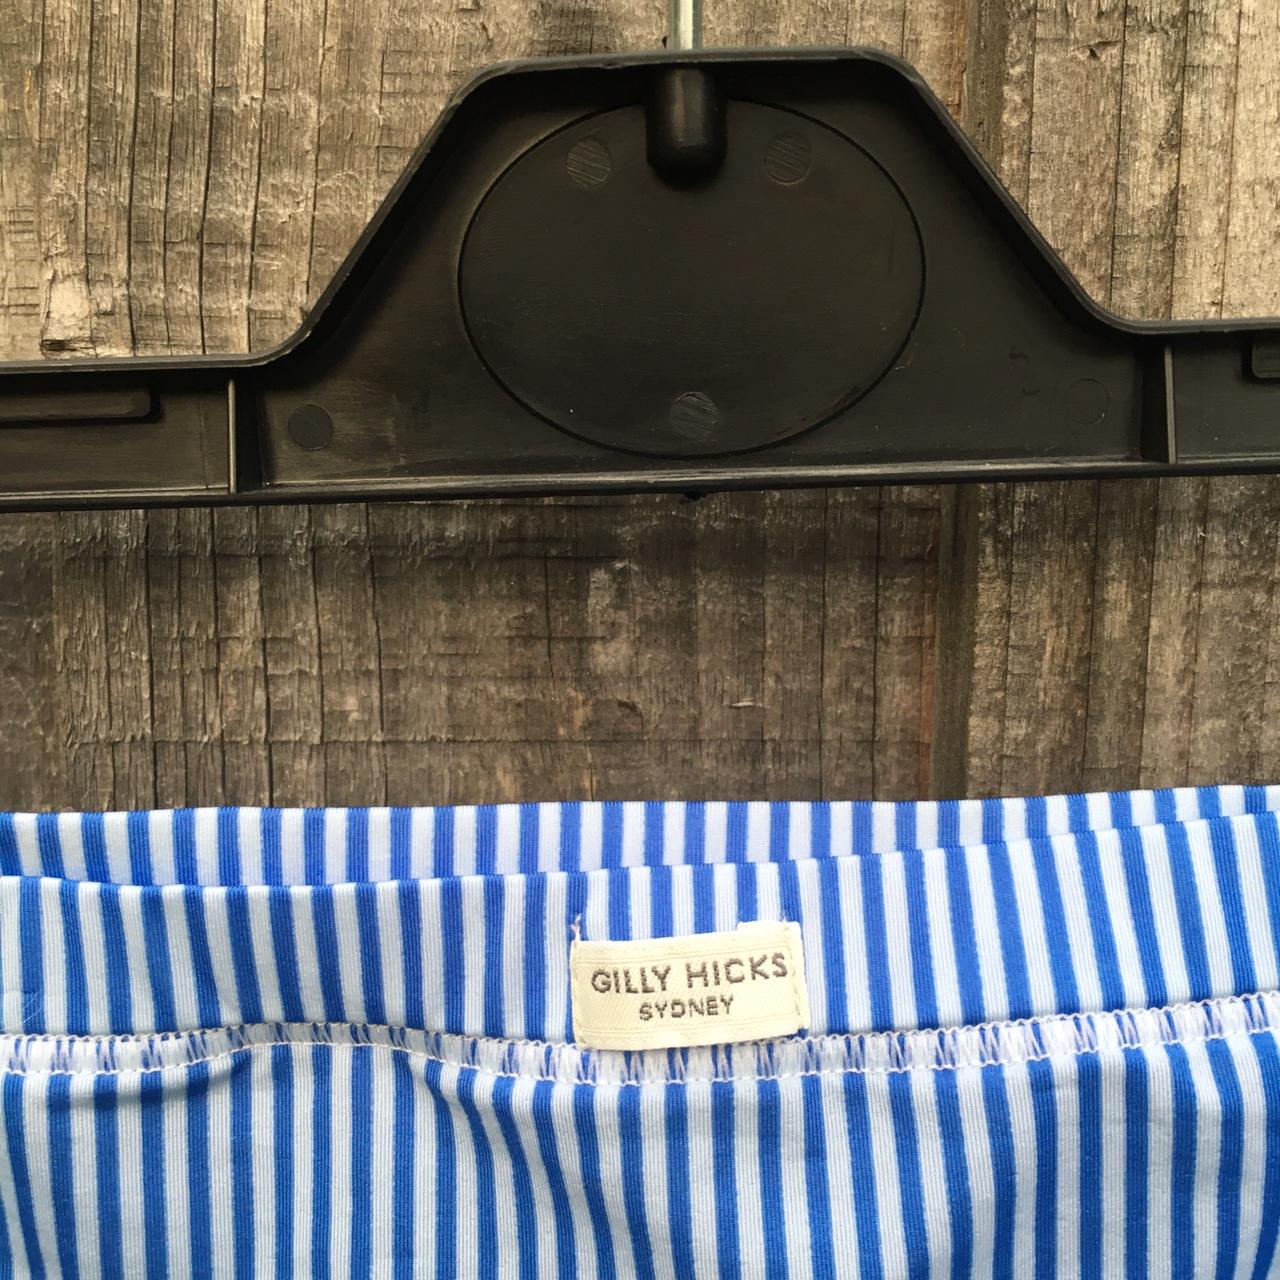 gilly hicks down undies blue and white striped - Depop